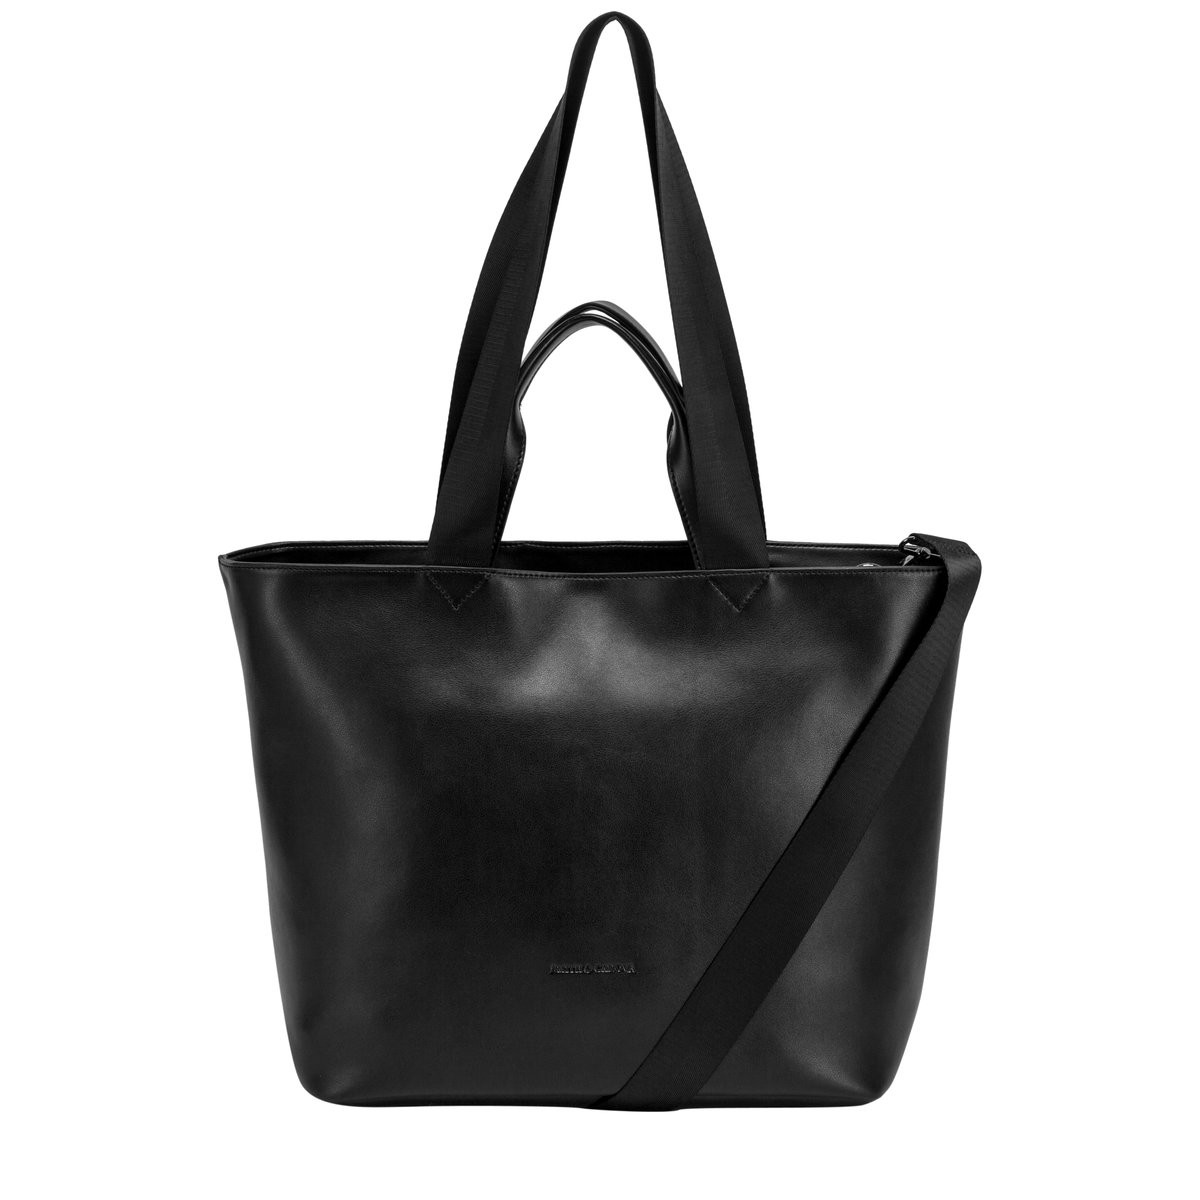 Smith & Canova Womens Smooth Leather Tote Shoulder Bag - Black - One Size